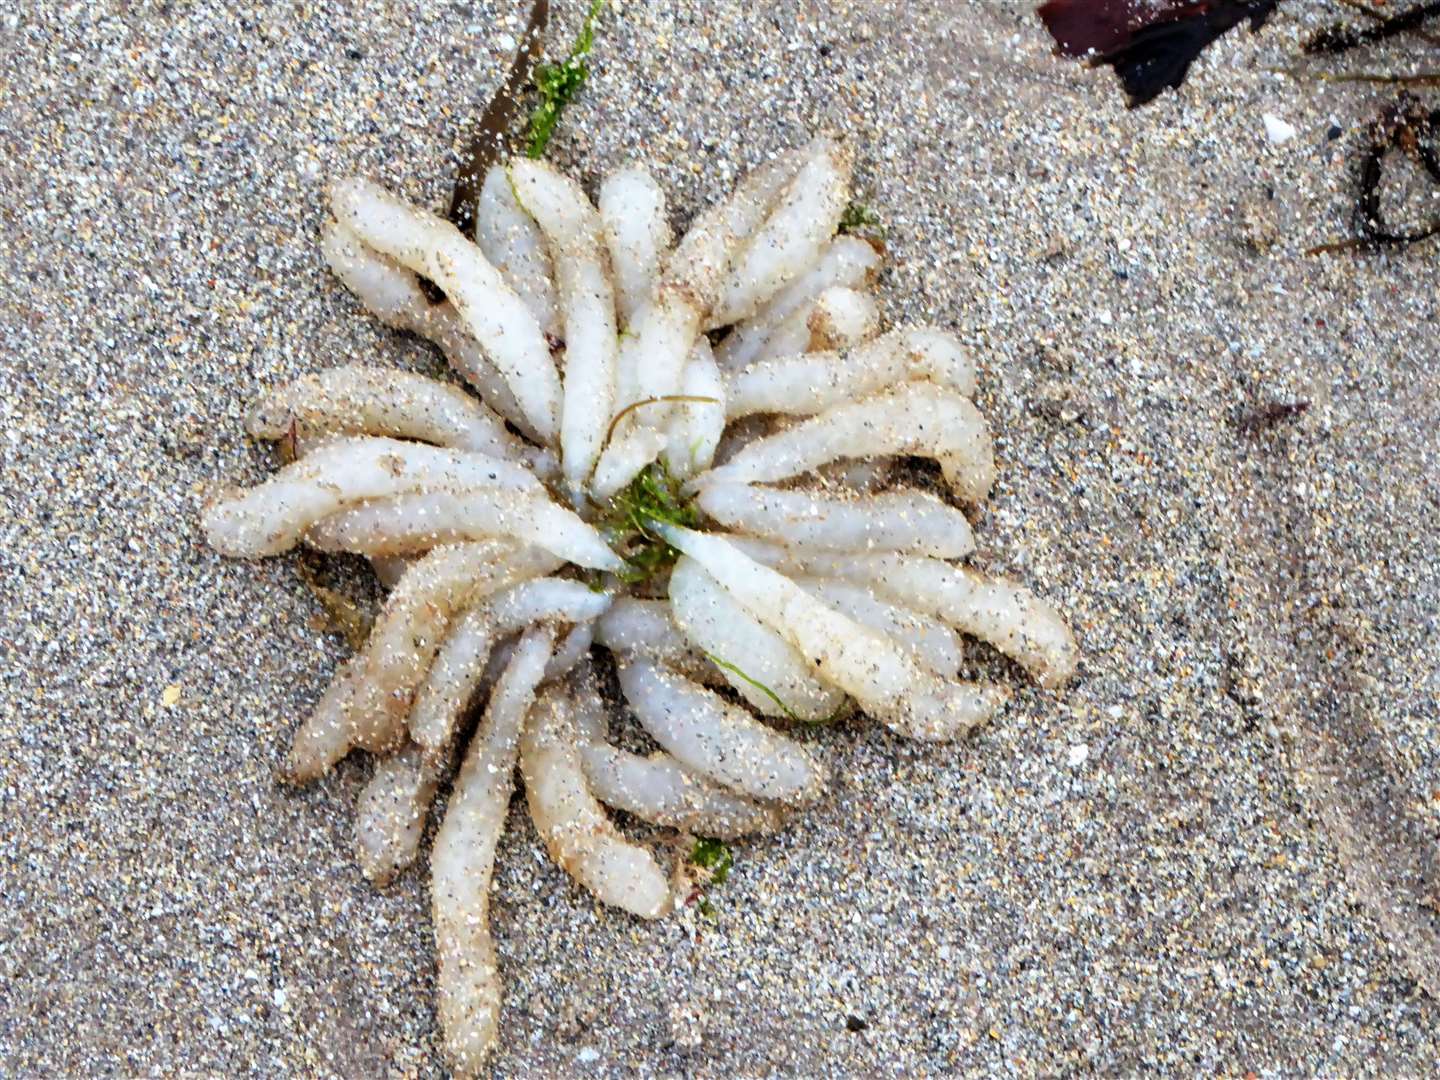 An unusual find at Reiss beach recently, squid eggs. Pictures: DGS